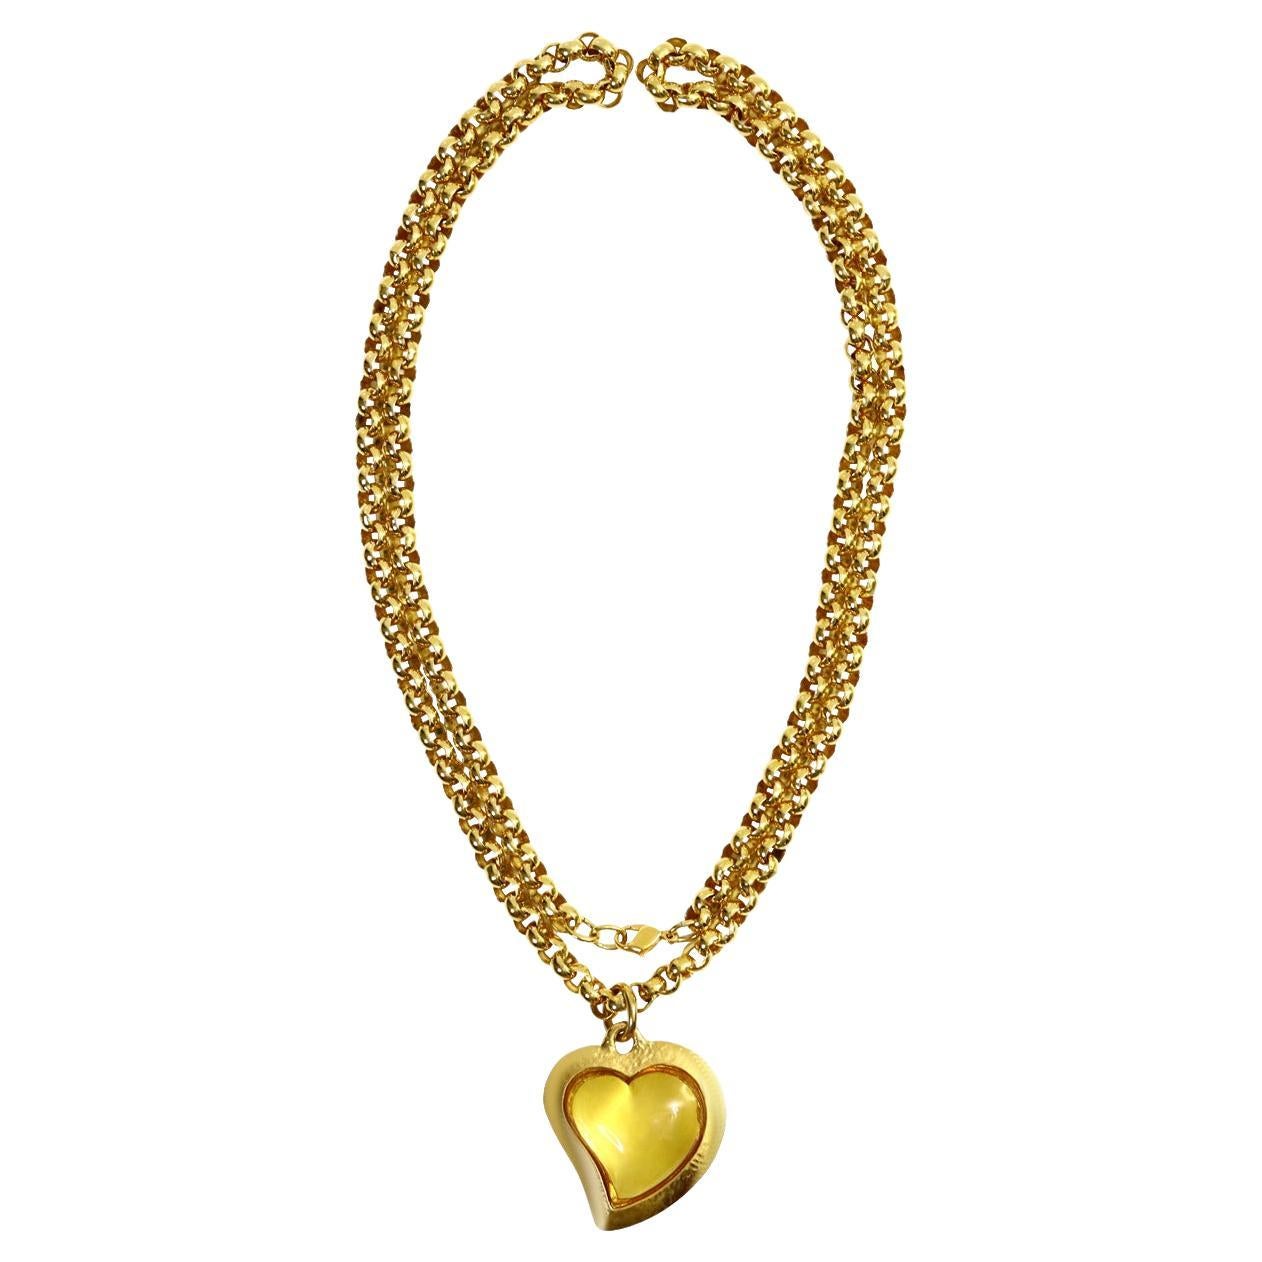 Vintage Yves Saint Laurent YSL Amber Resin Heart on Rollo Long Chain Circa 1980s For Sale 3